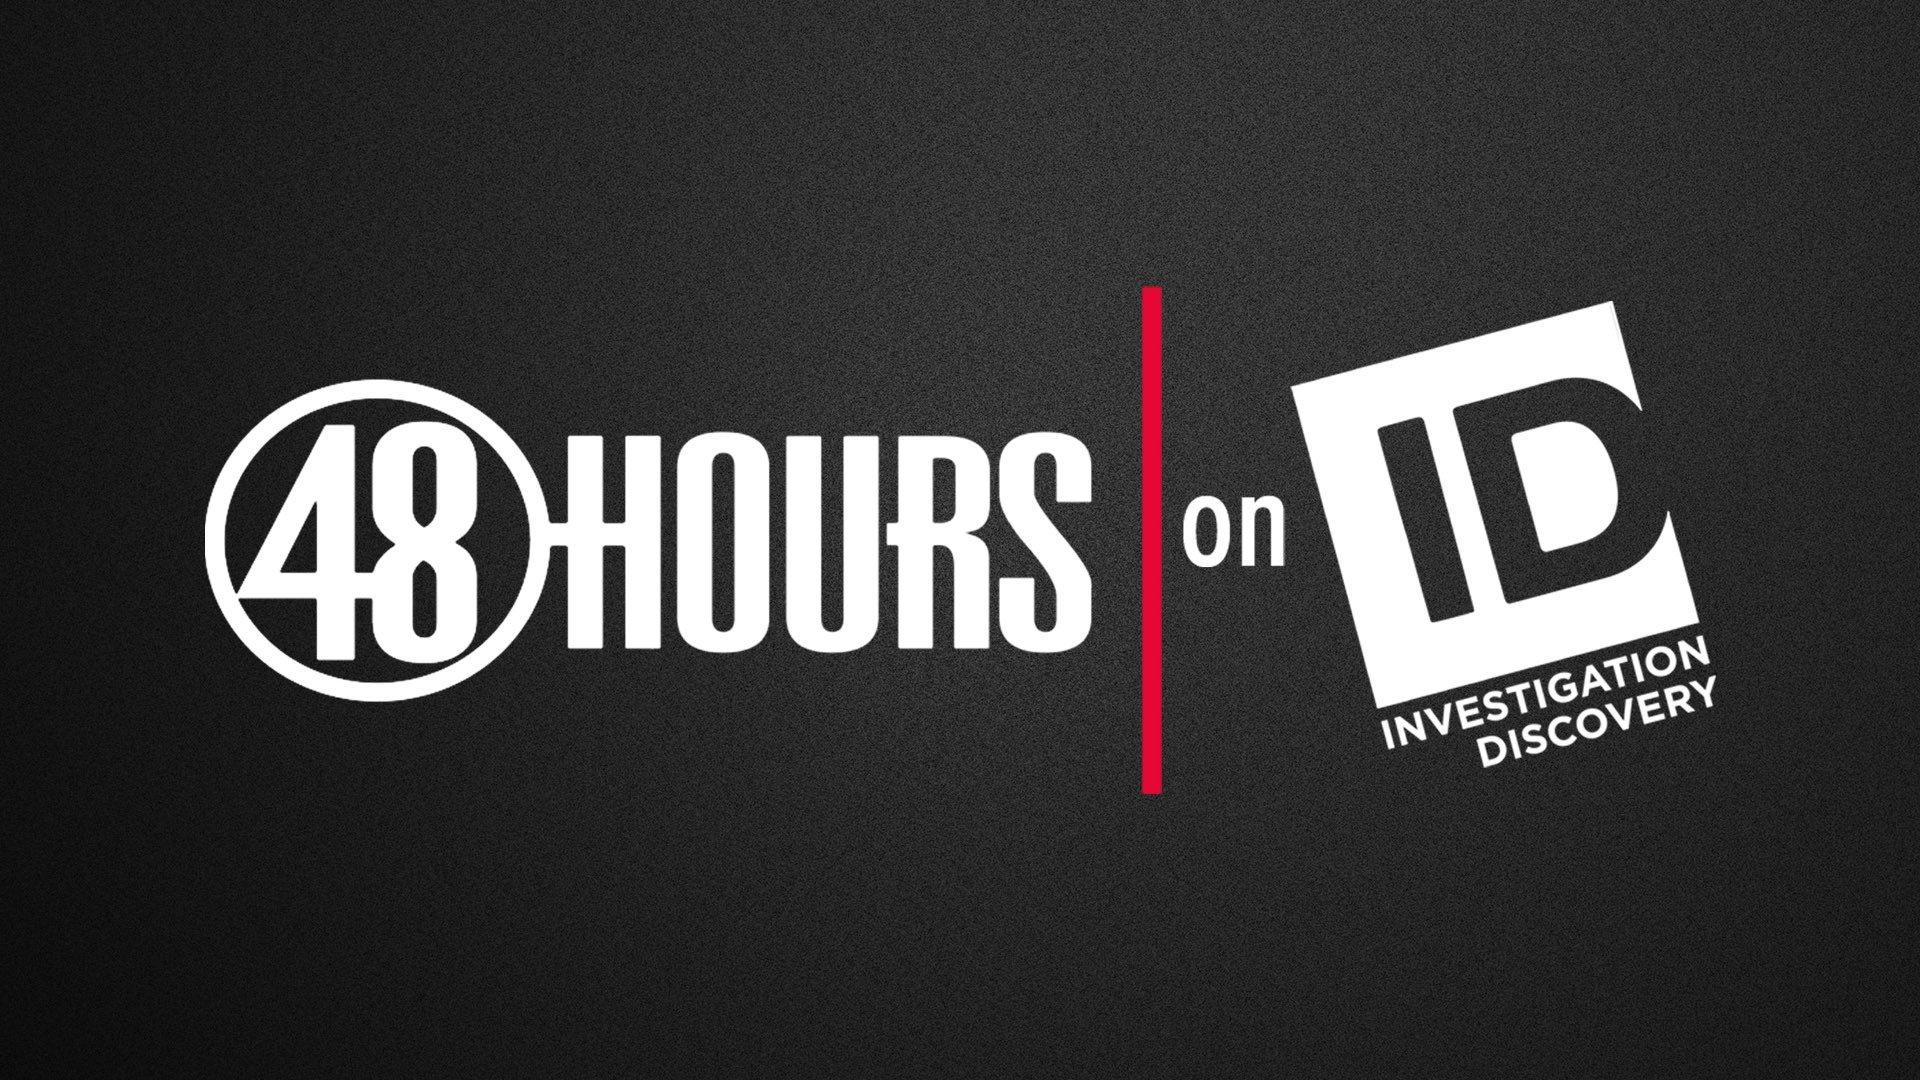 48 Hours on ID Full Episodes Watch Online Philo